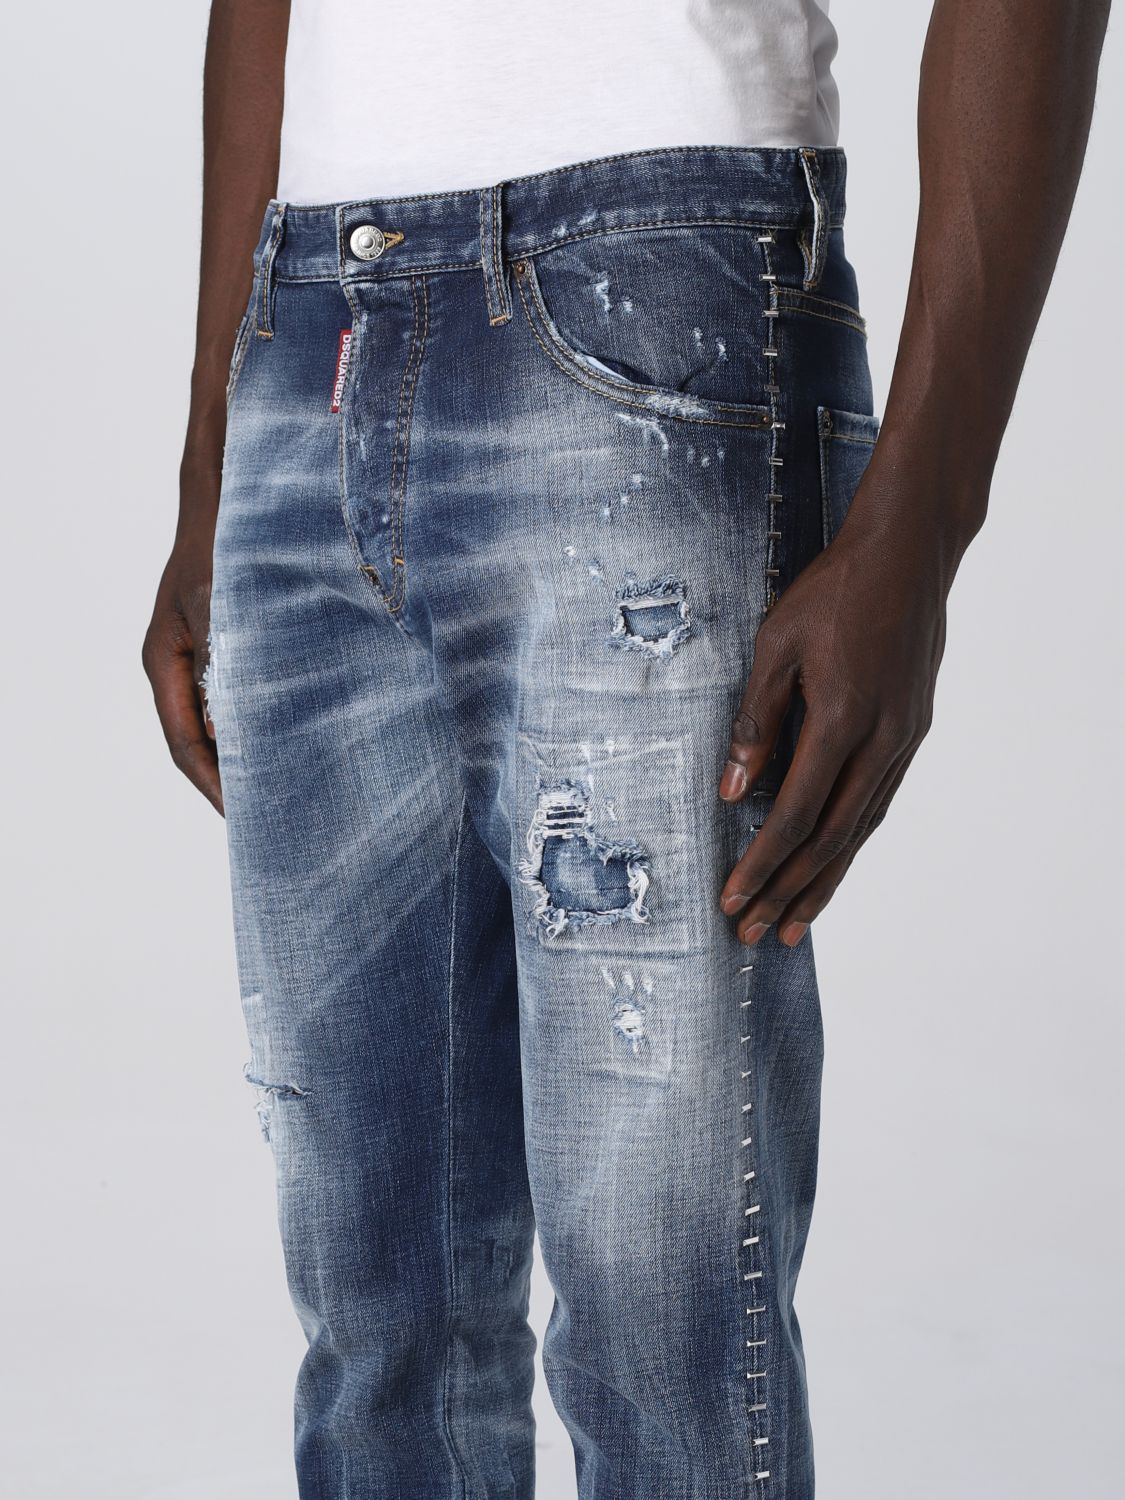 Jeans Dsquared2: Jeans Dsquared2 in denim blue navy 4